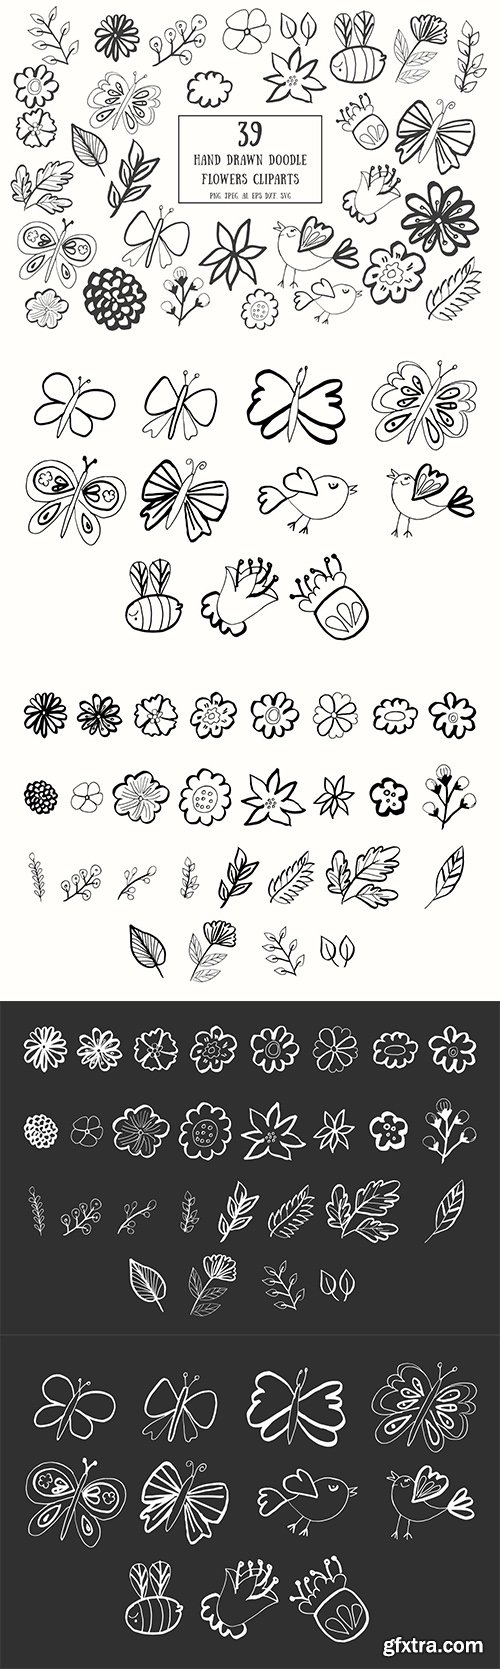 35+ Handdrawn Doodle Flowers Cliparts